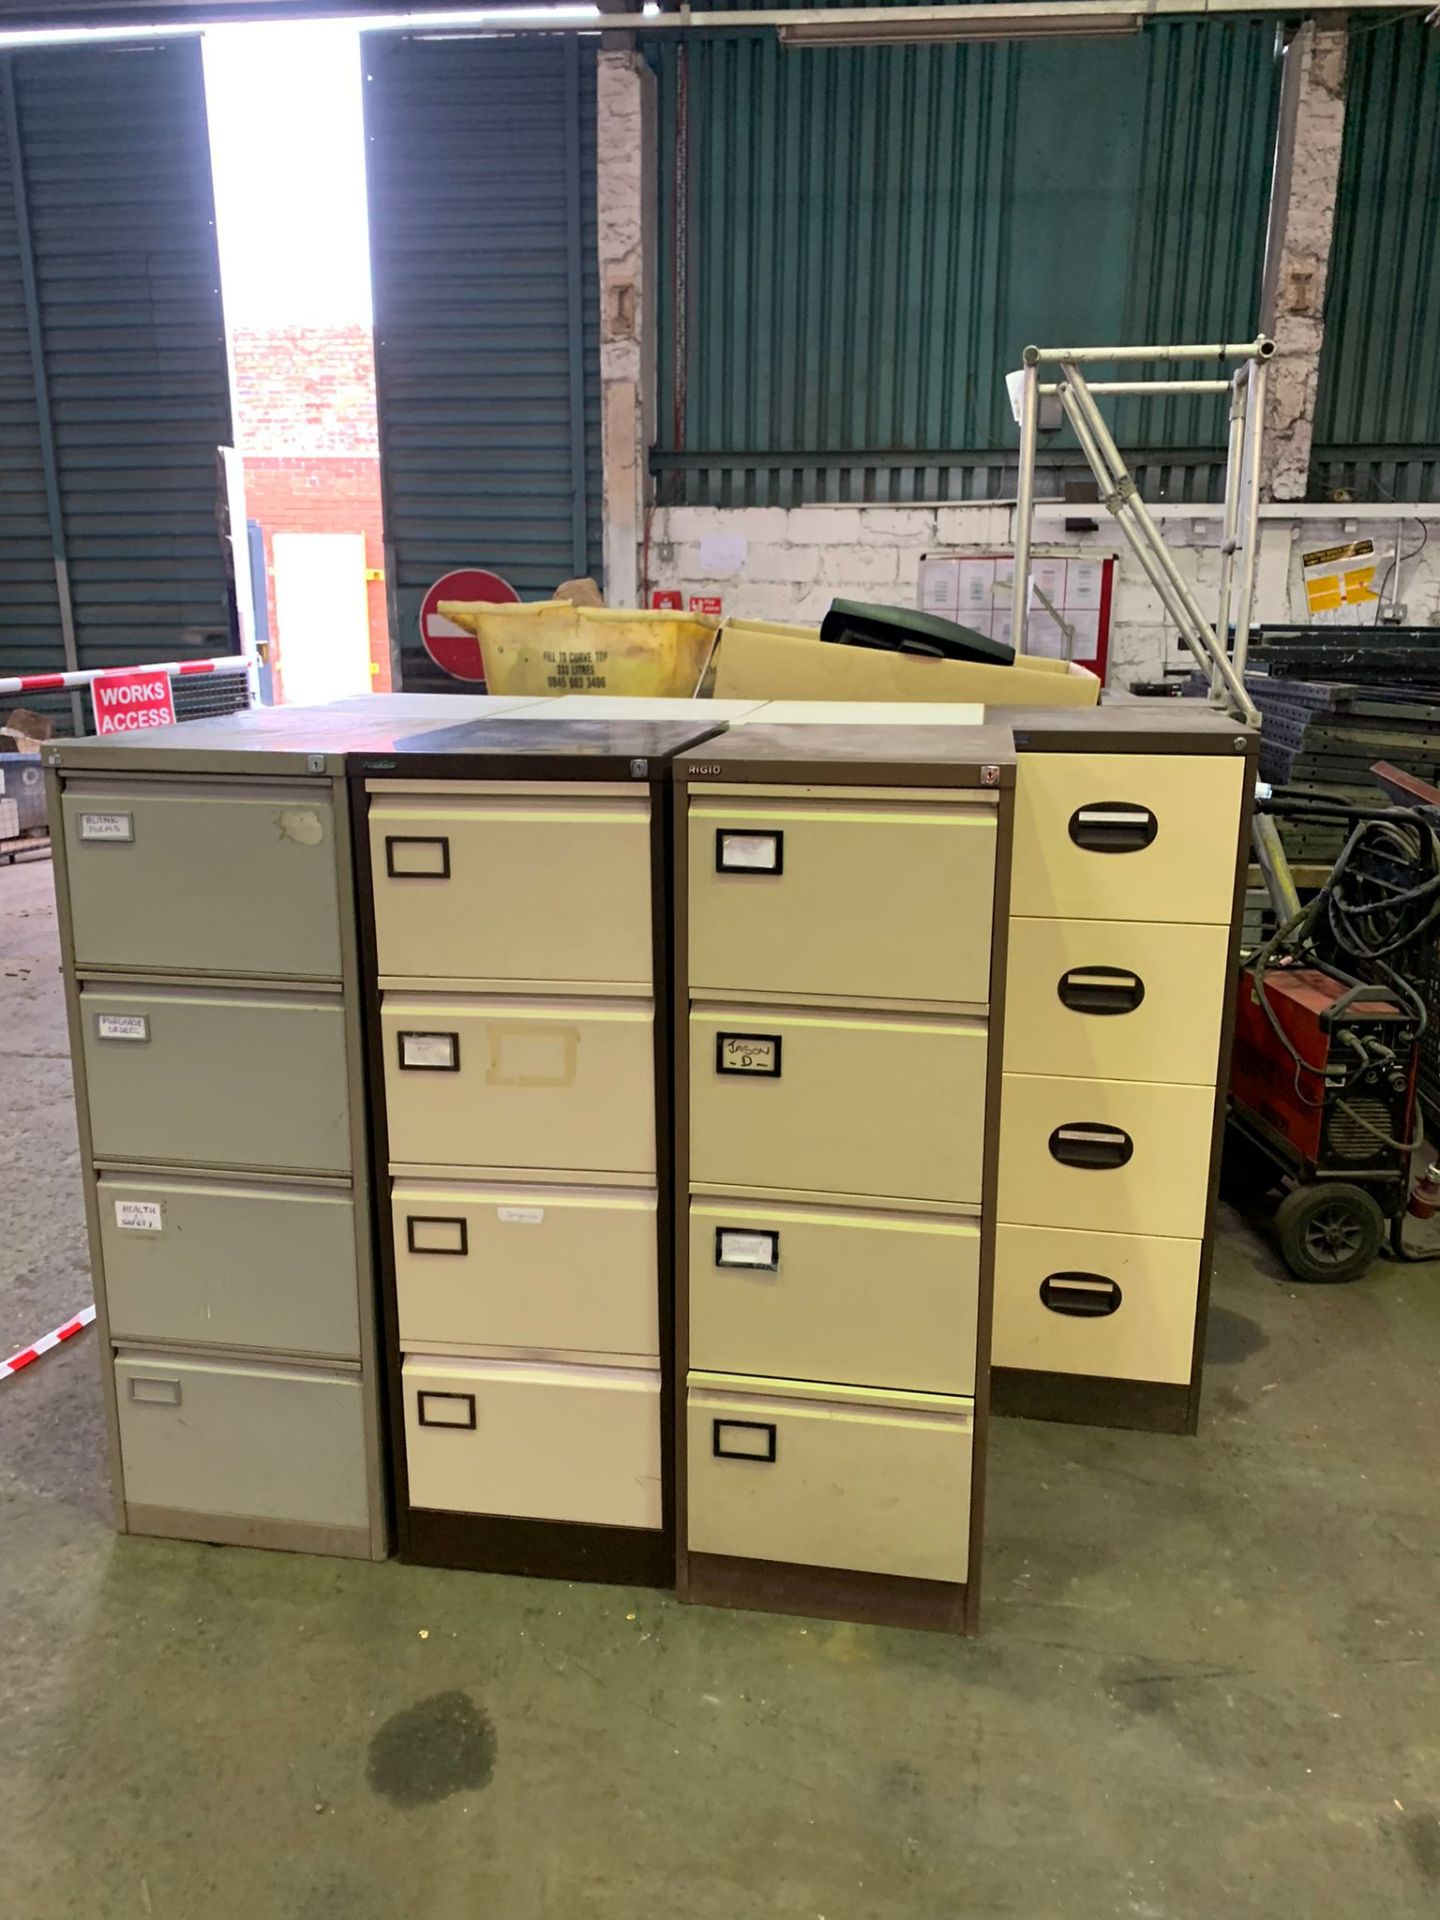 7 X 4 DRAWER ECONOMY FILING CABINETS